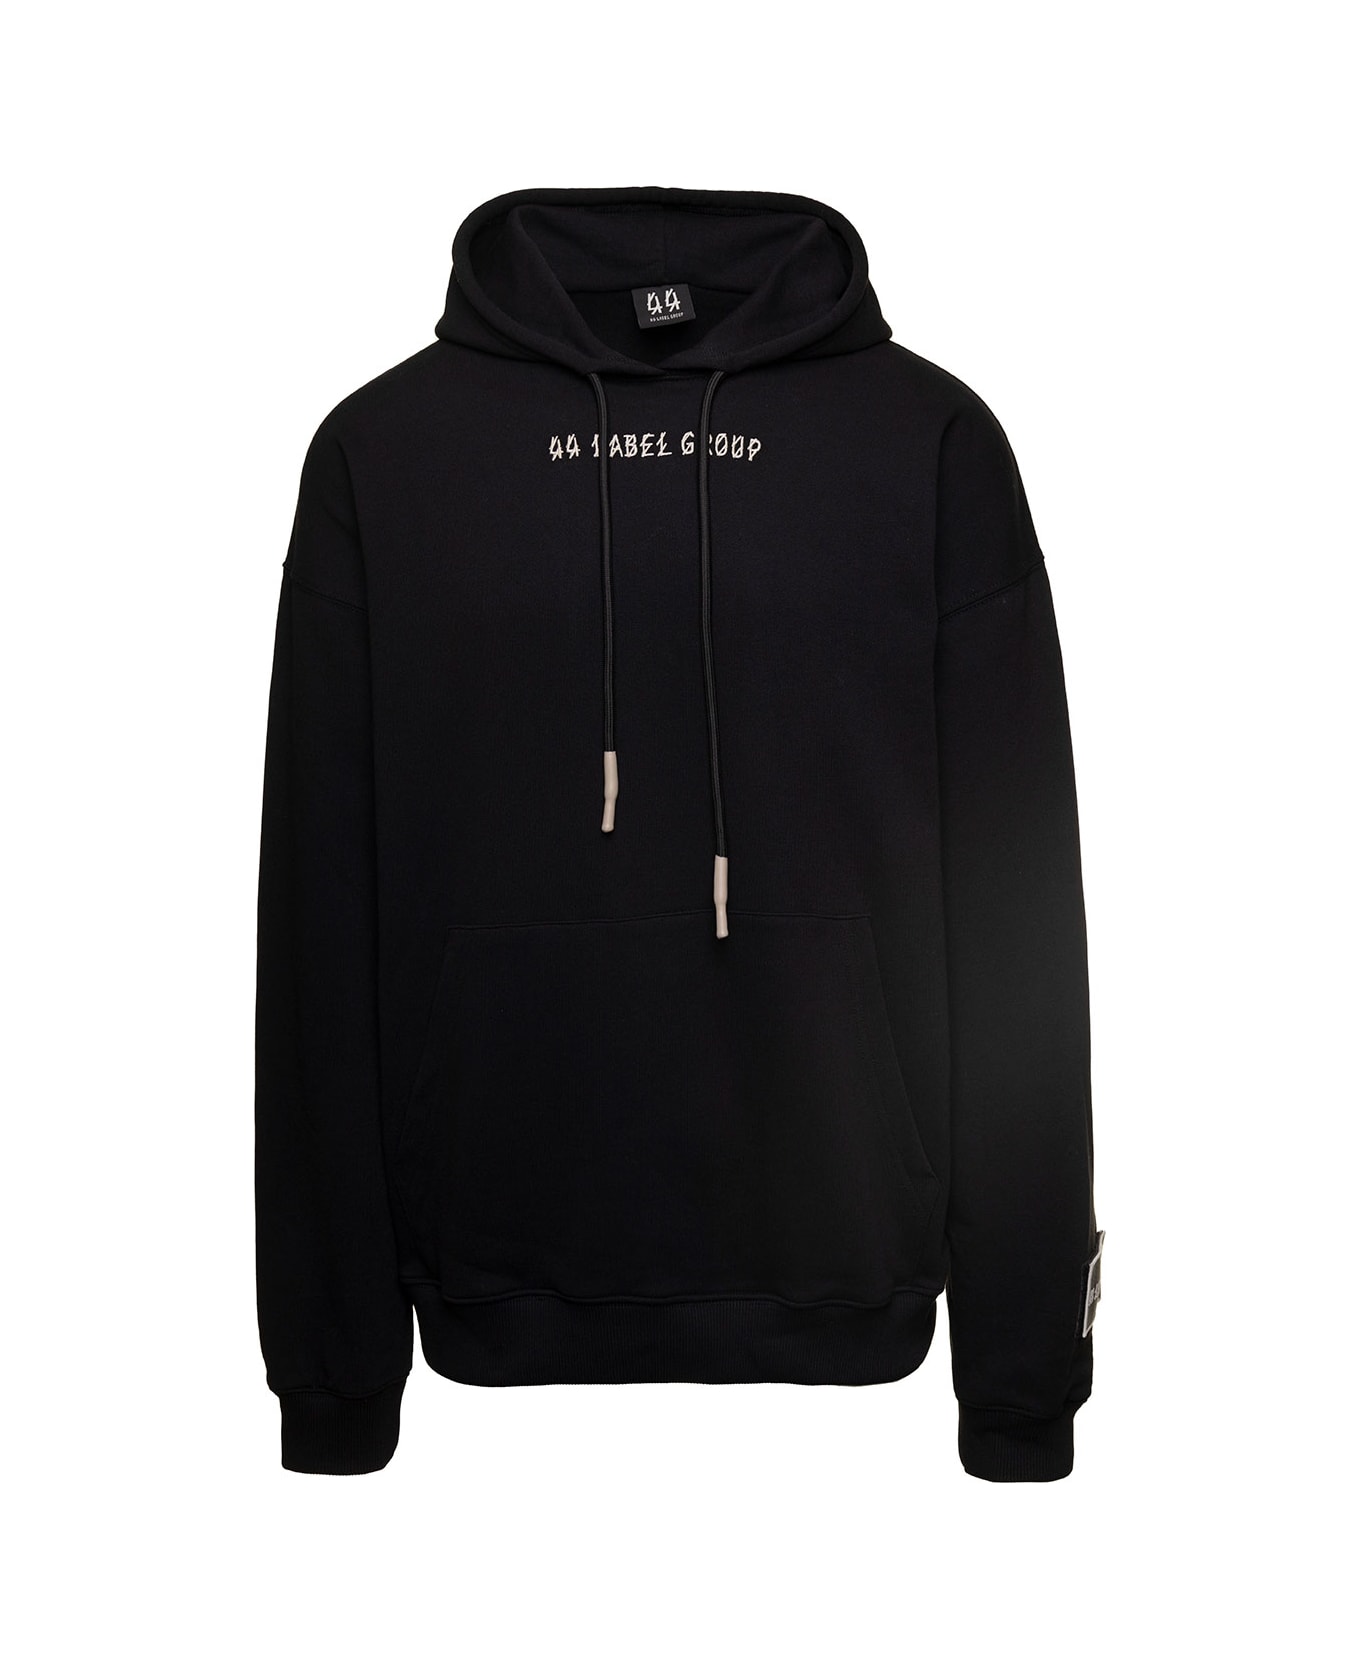 44 Label Group Black Hoodie With Contrasting Logo Embroidery In Cotton Man - Black